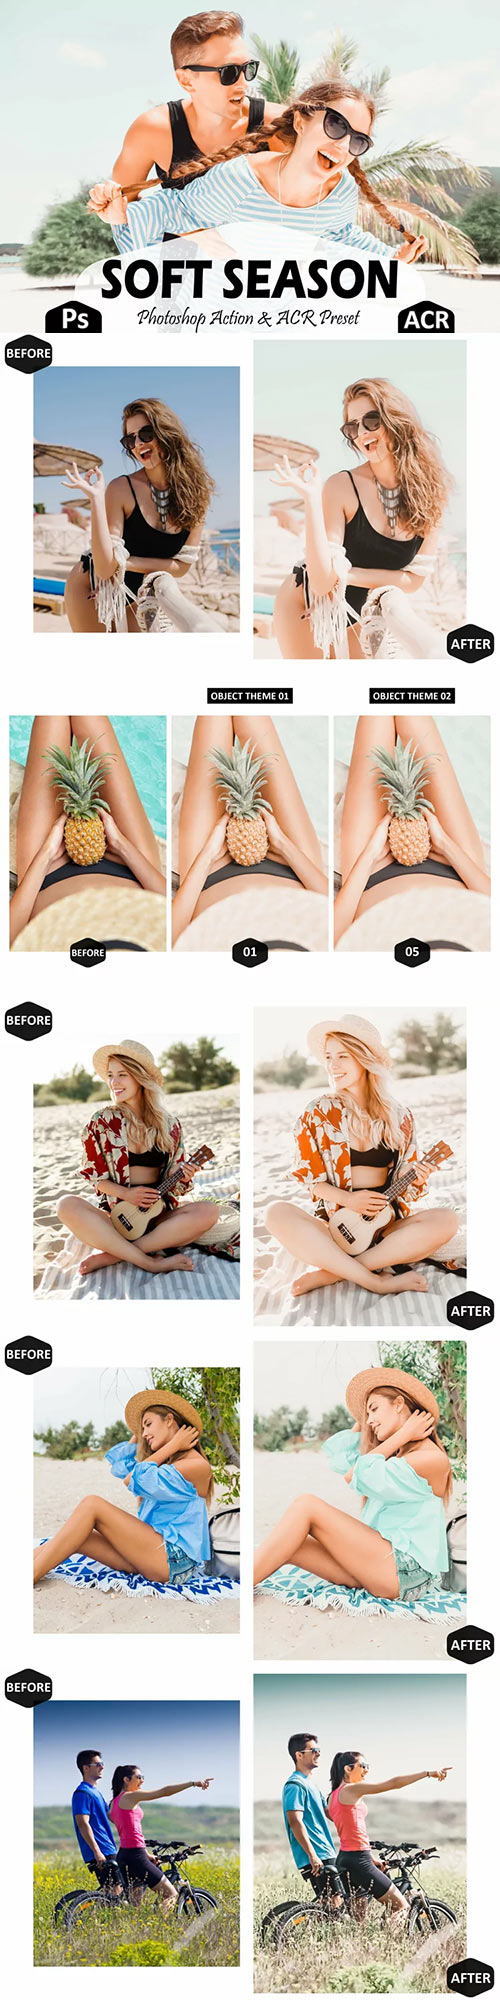 10 Soft Season Photoshop Actions And ACR Presets, Summer 2009759